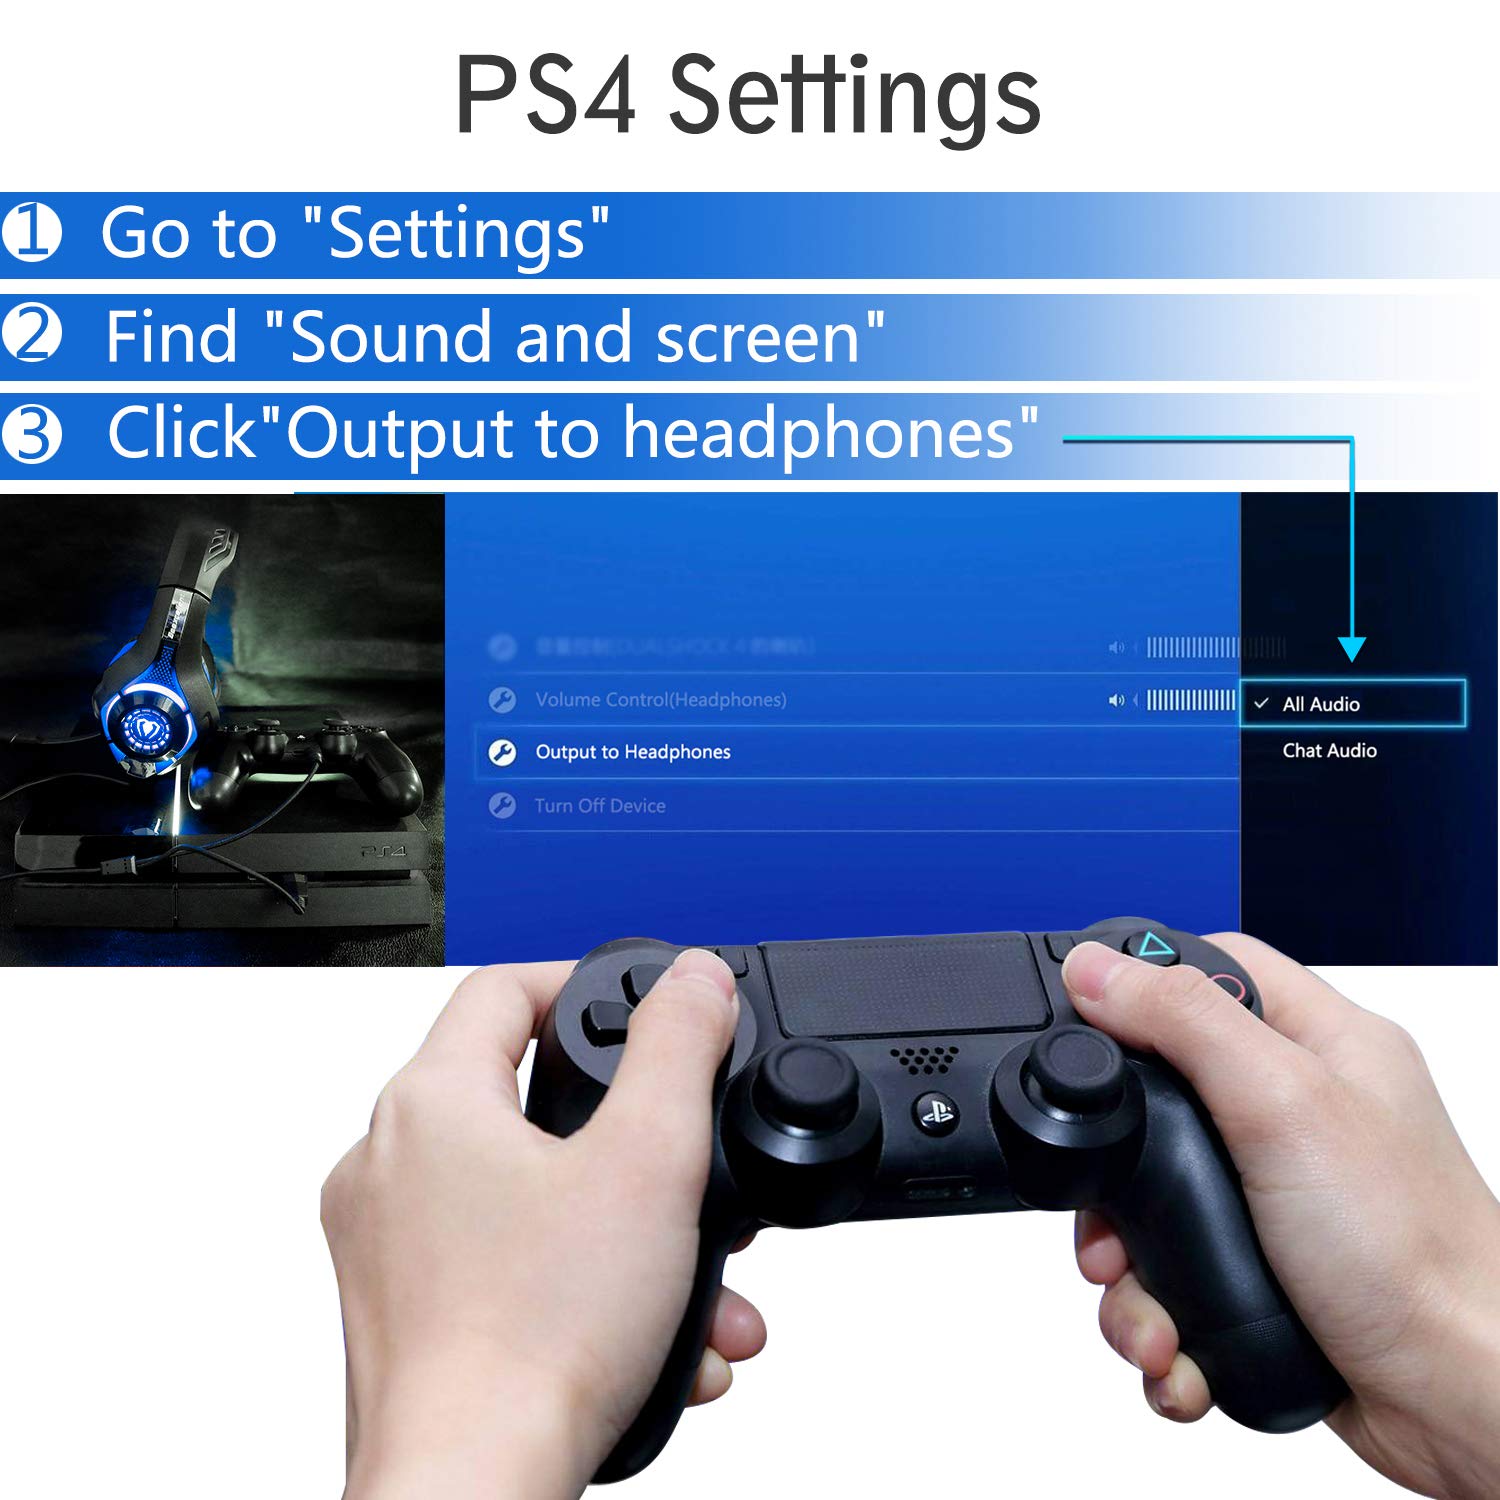 ps4 remote play for mac os x 10.8